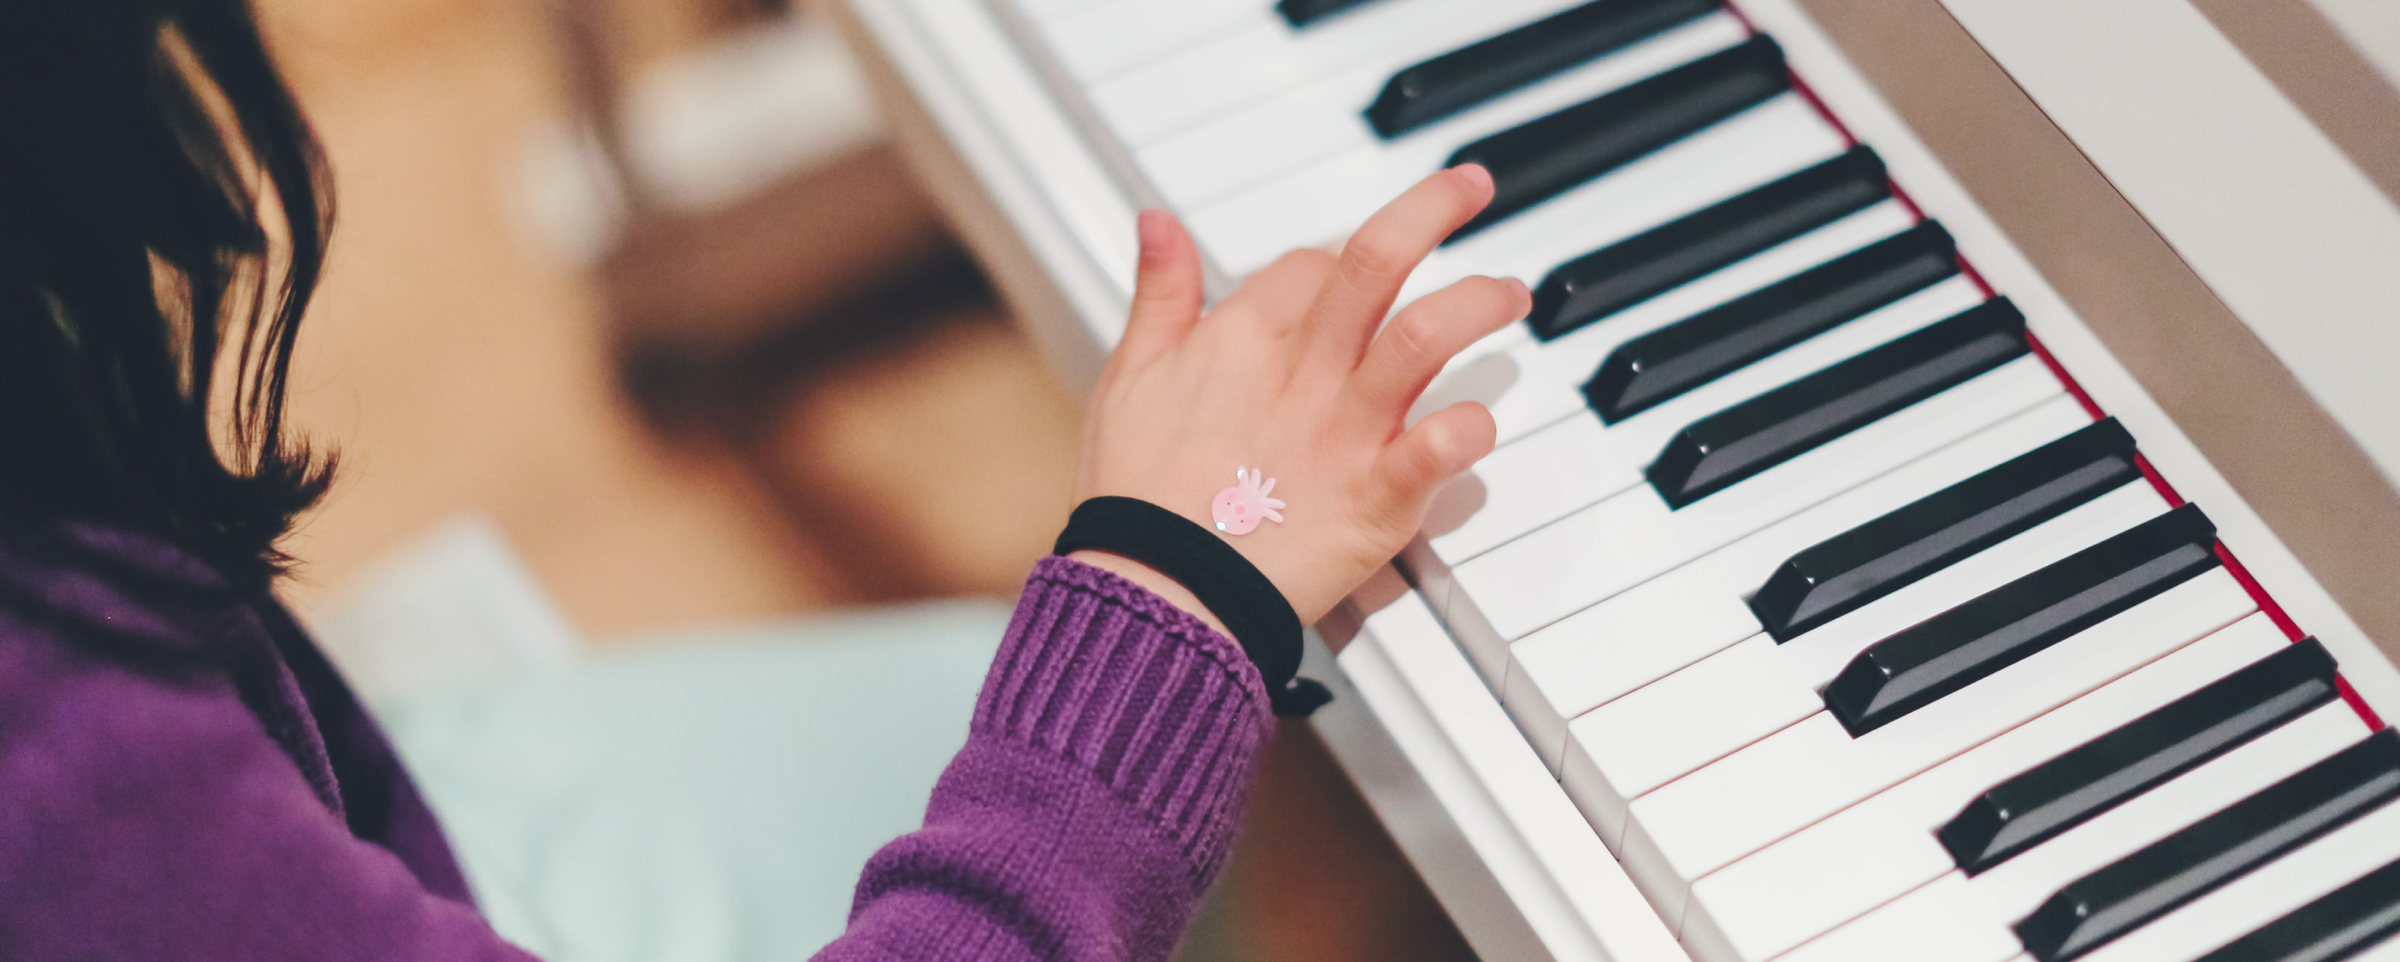 13 Best Anime Piano Songs to Play - Wandering Tunes